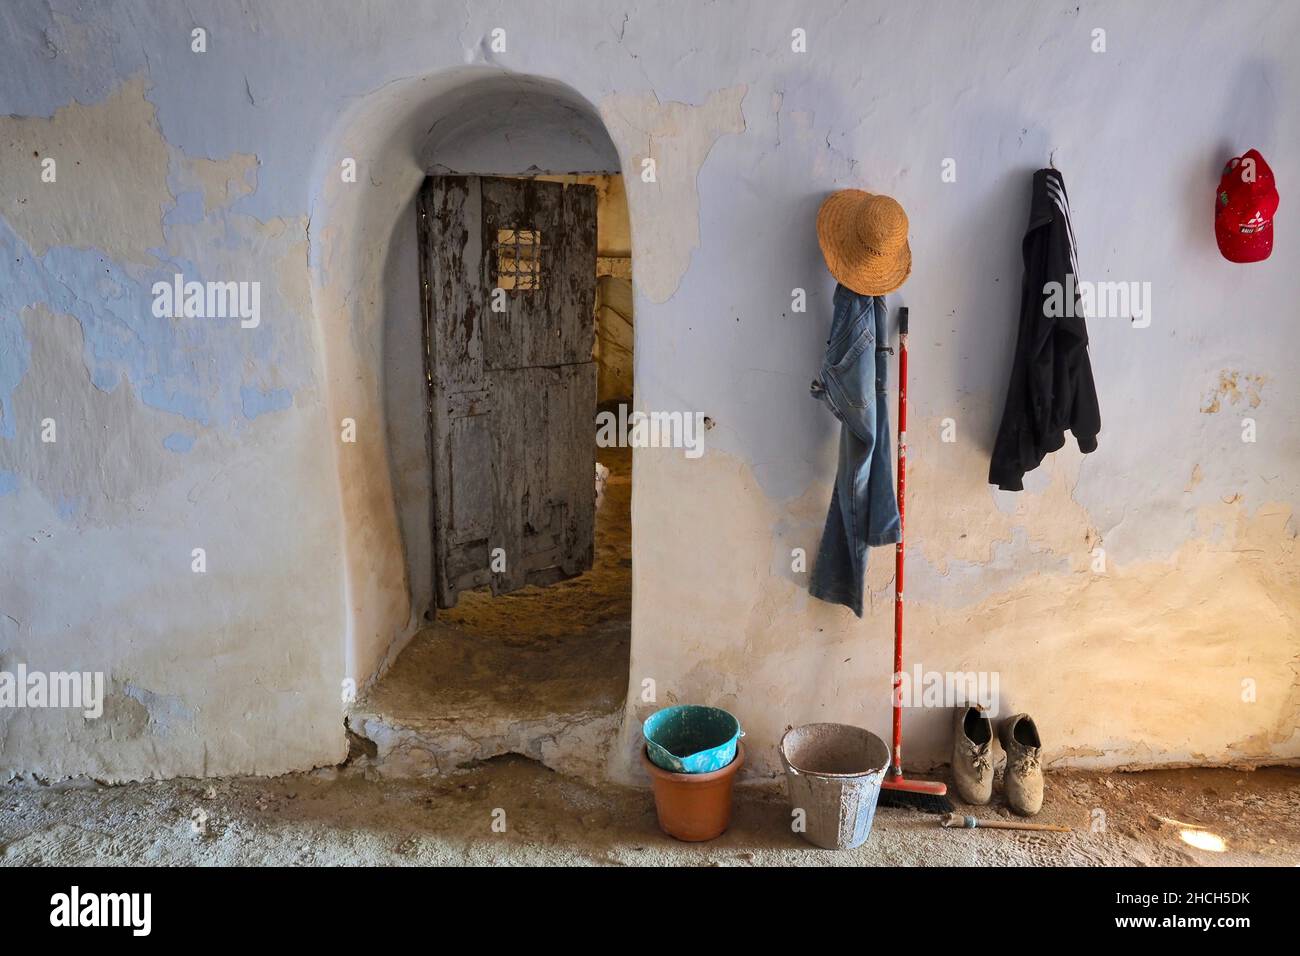 Still life with work clothes, straw hat, bucket, broom and work shoes, renovation of a cave house, Andalusia, Spain Stock Photo